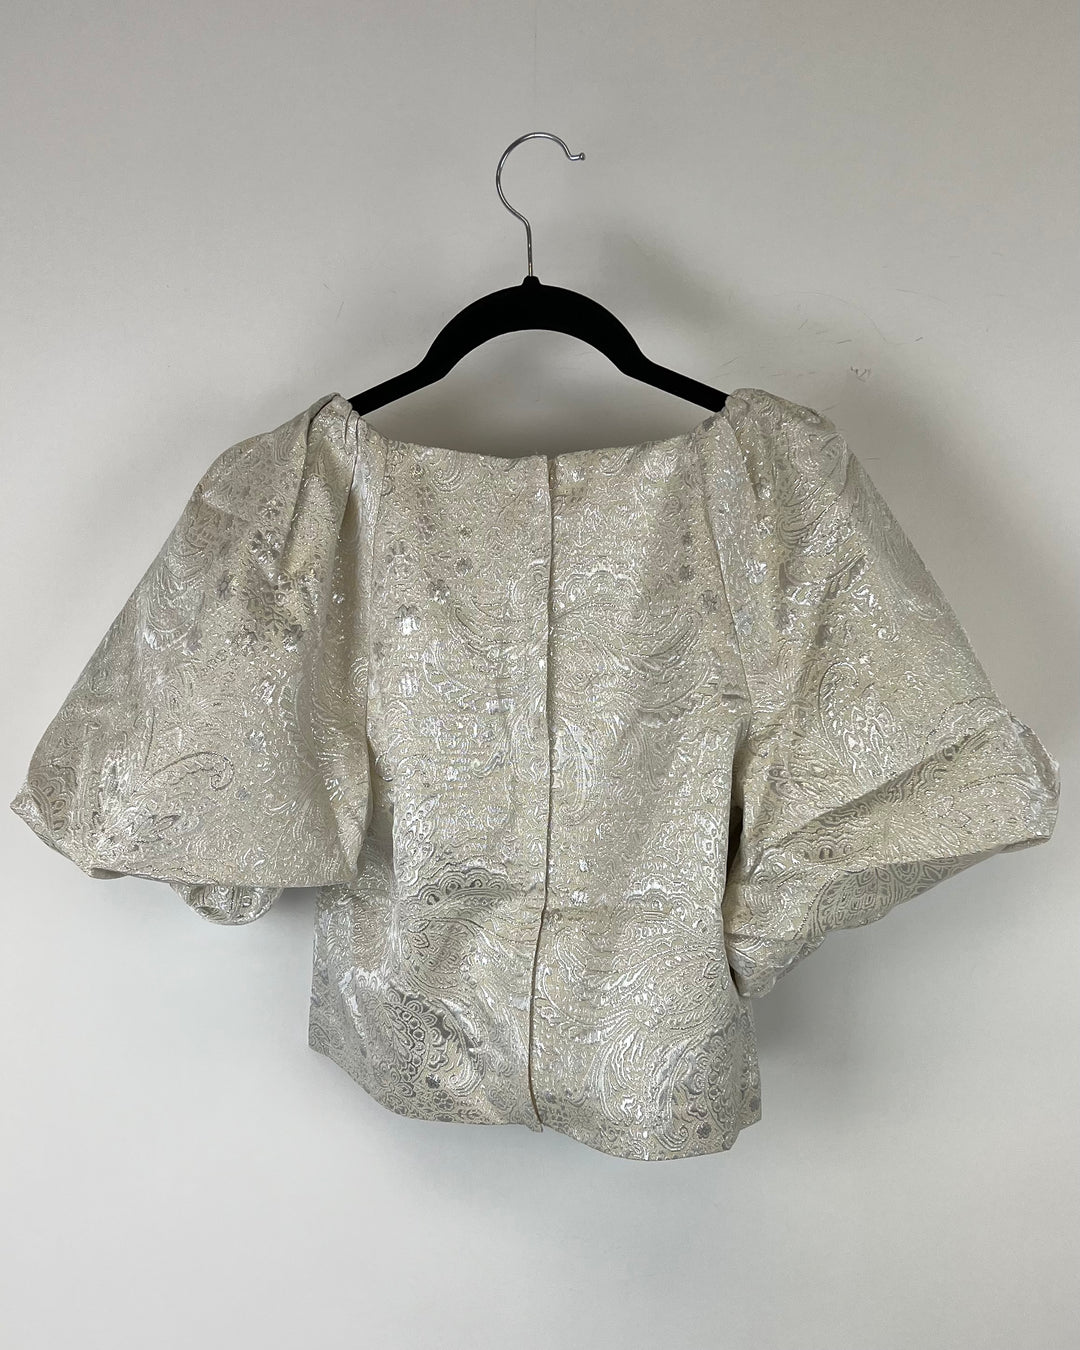 Metallic Jacquard Puff Sleeve Cropped Blouse- Size 00, 0, 4, 8, 10, 12, and 14